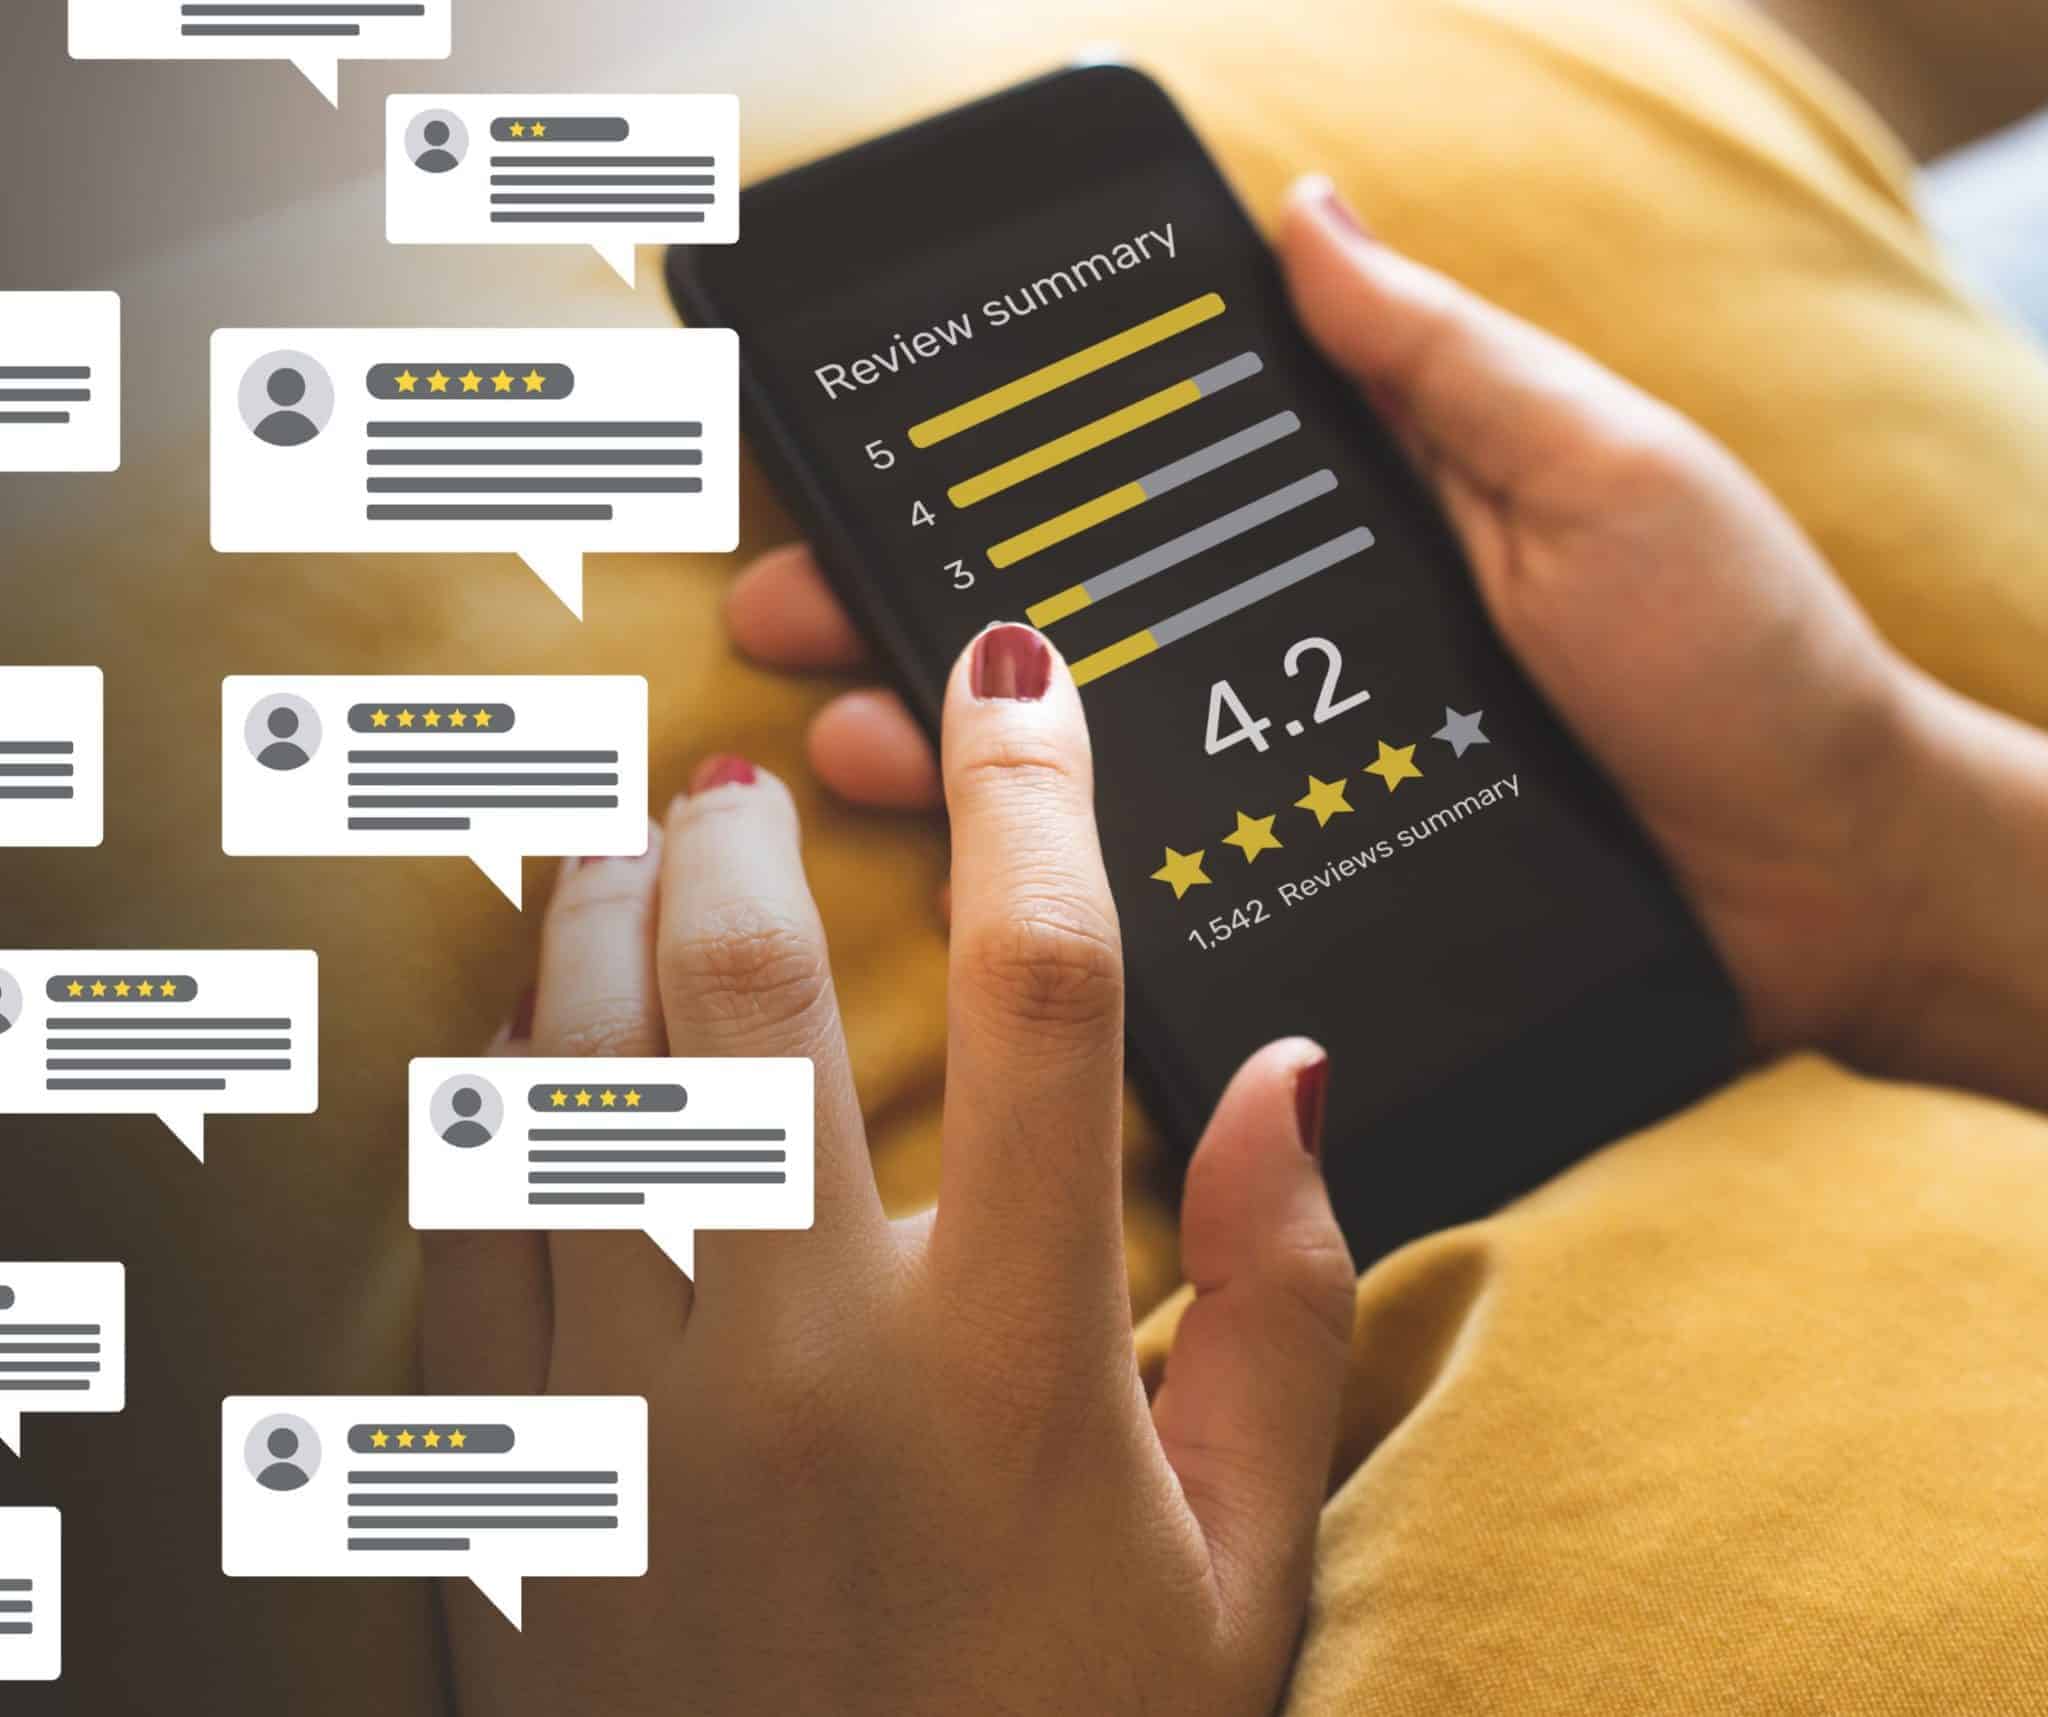 Star ratings and opinions – basic elements influencing the choice of a hotel